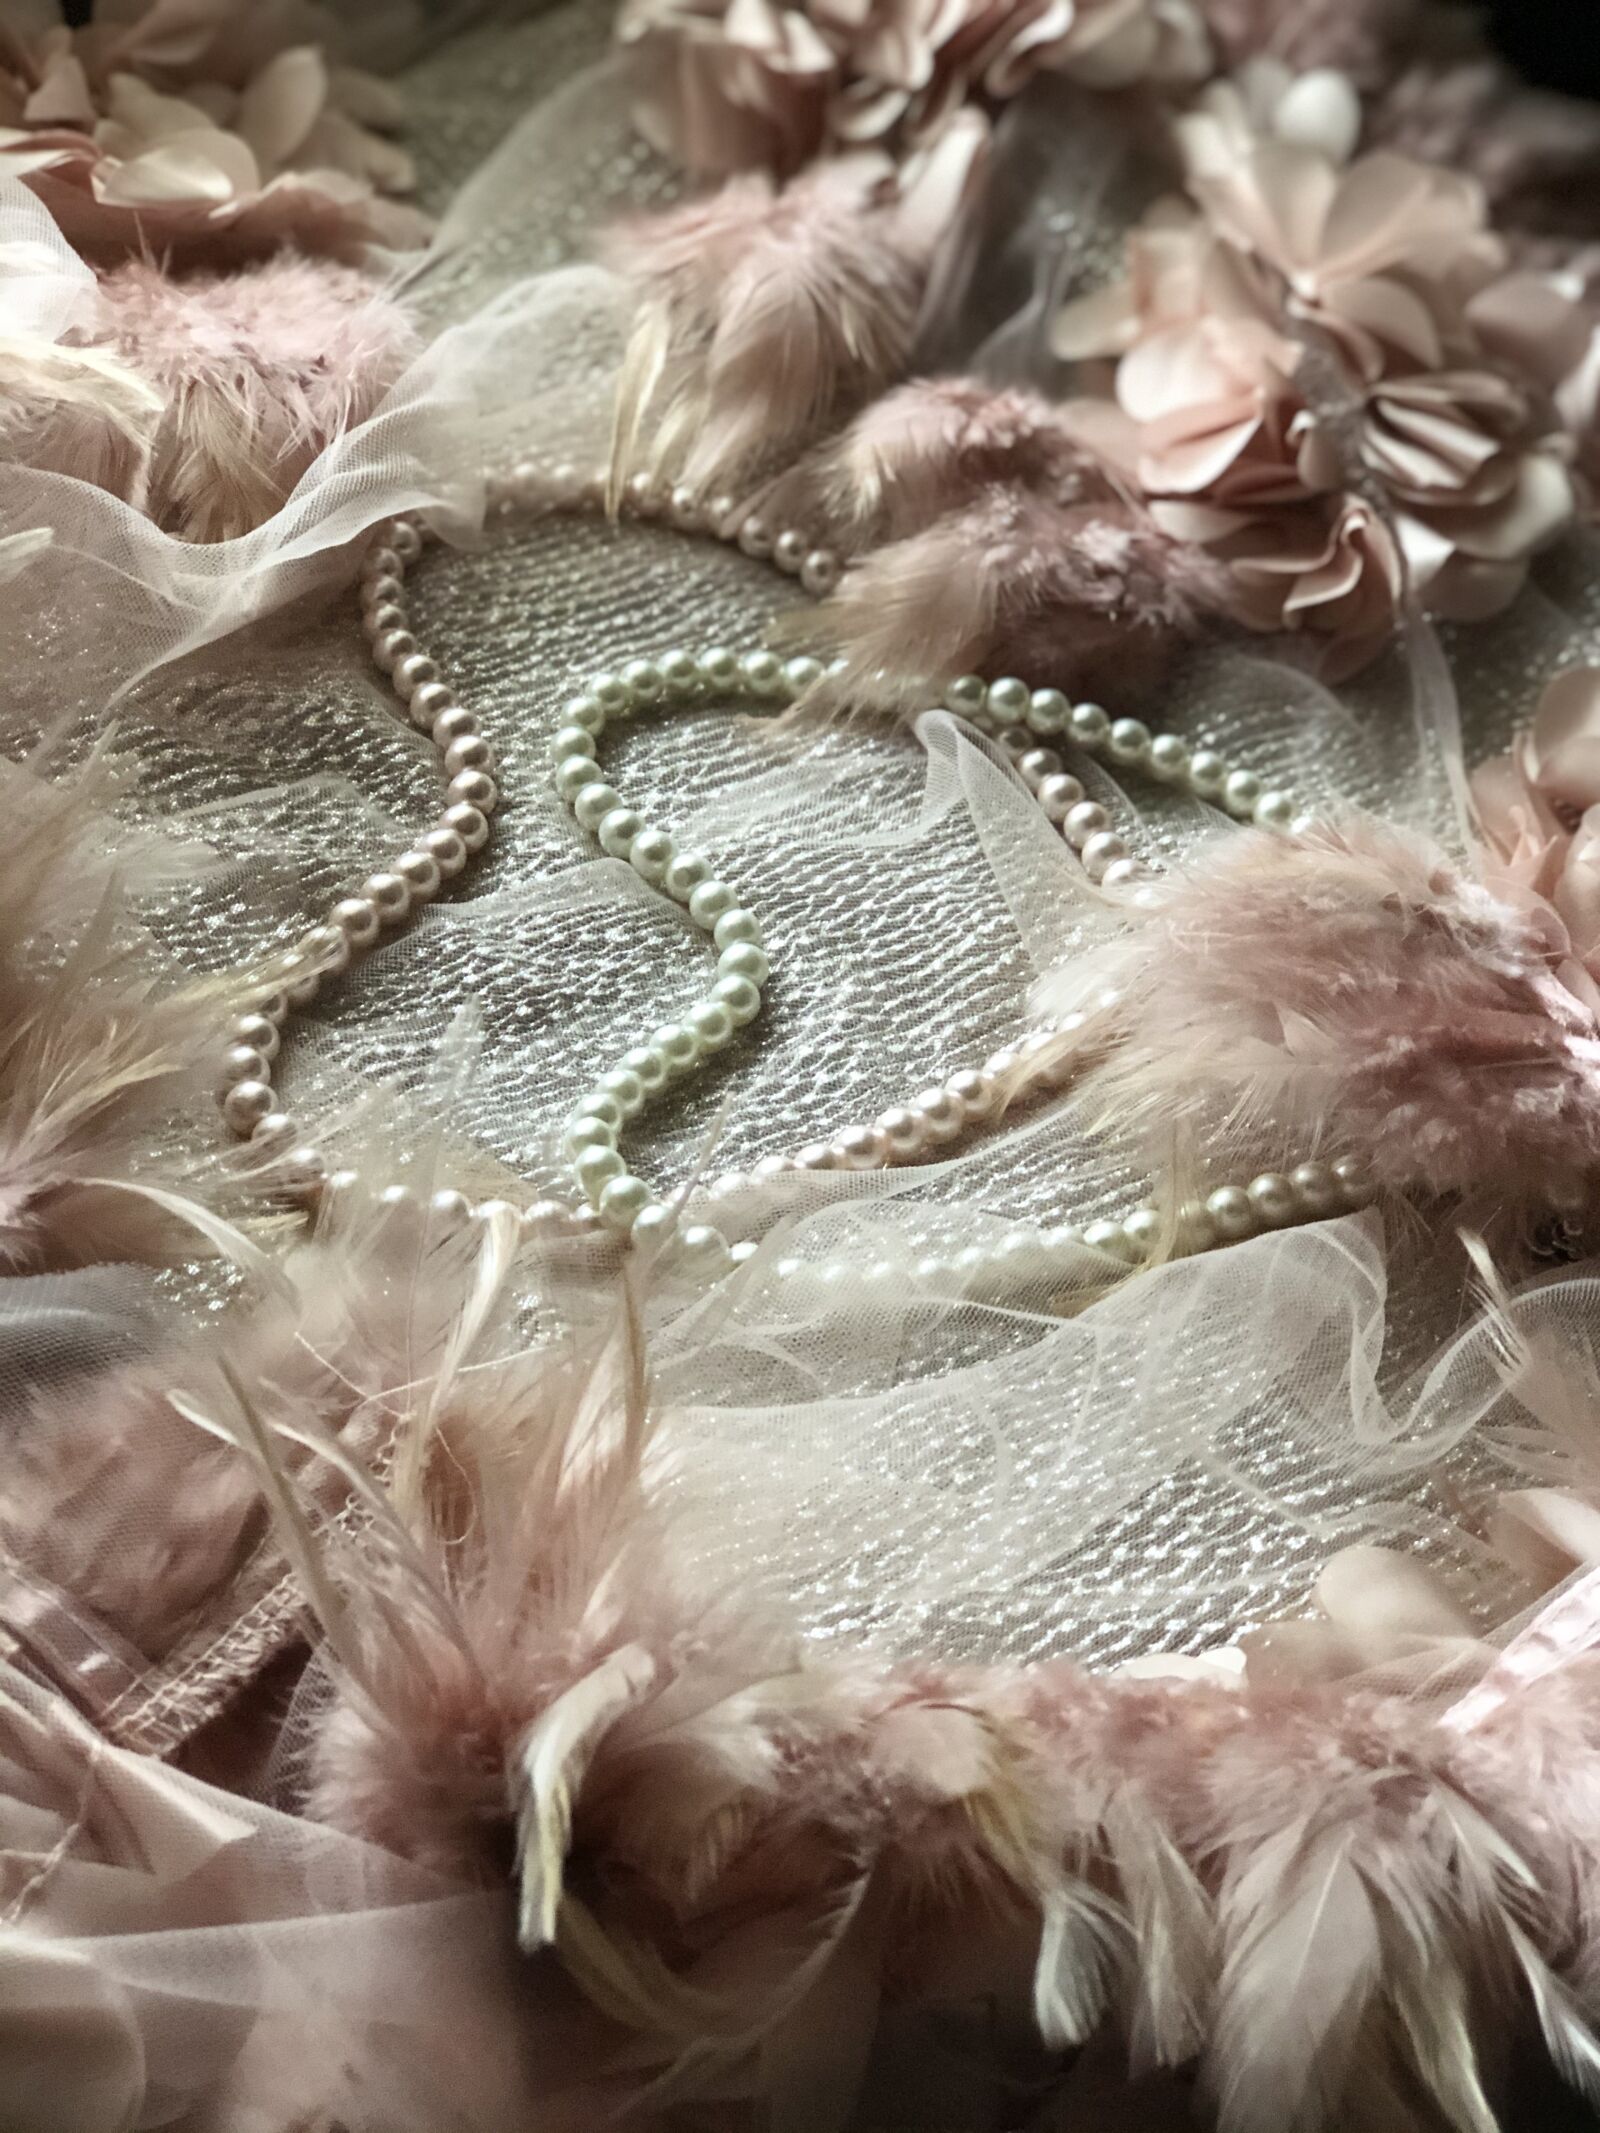 iPhone 8 Plus back dual camera 6.6mm f/2.8 sample photo. Feathers, pearls, antique photography